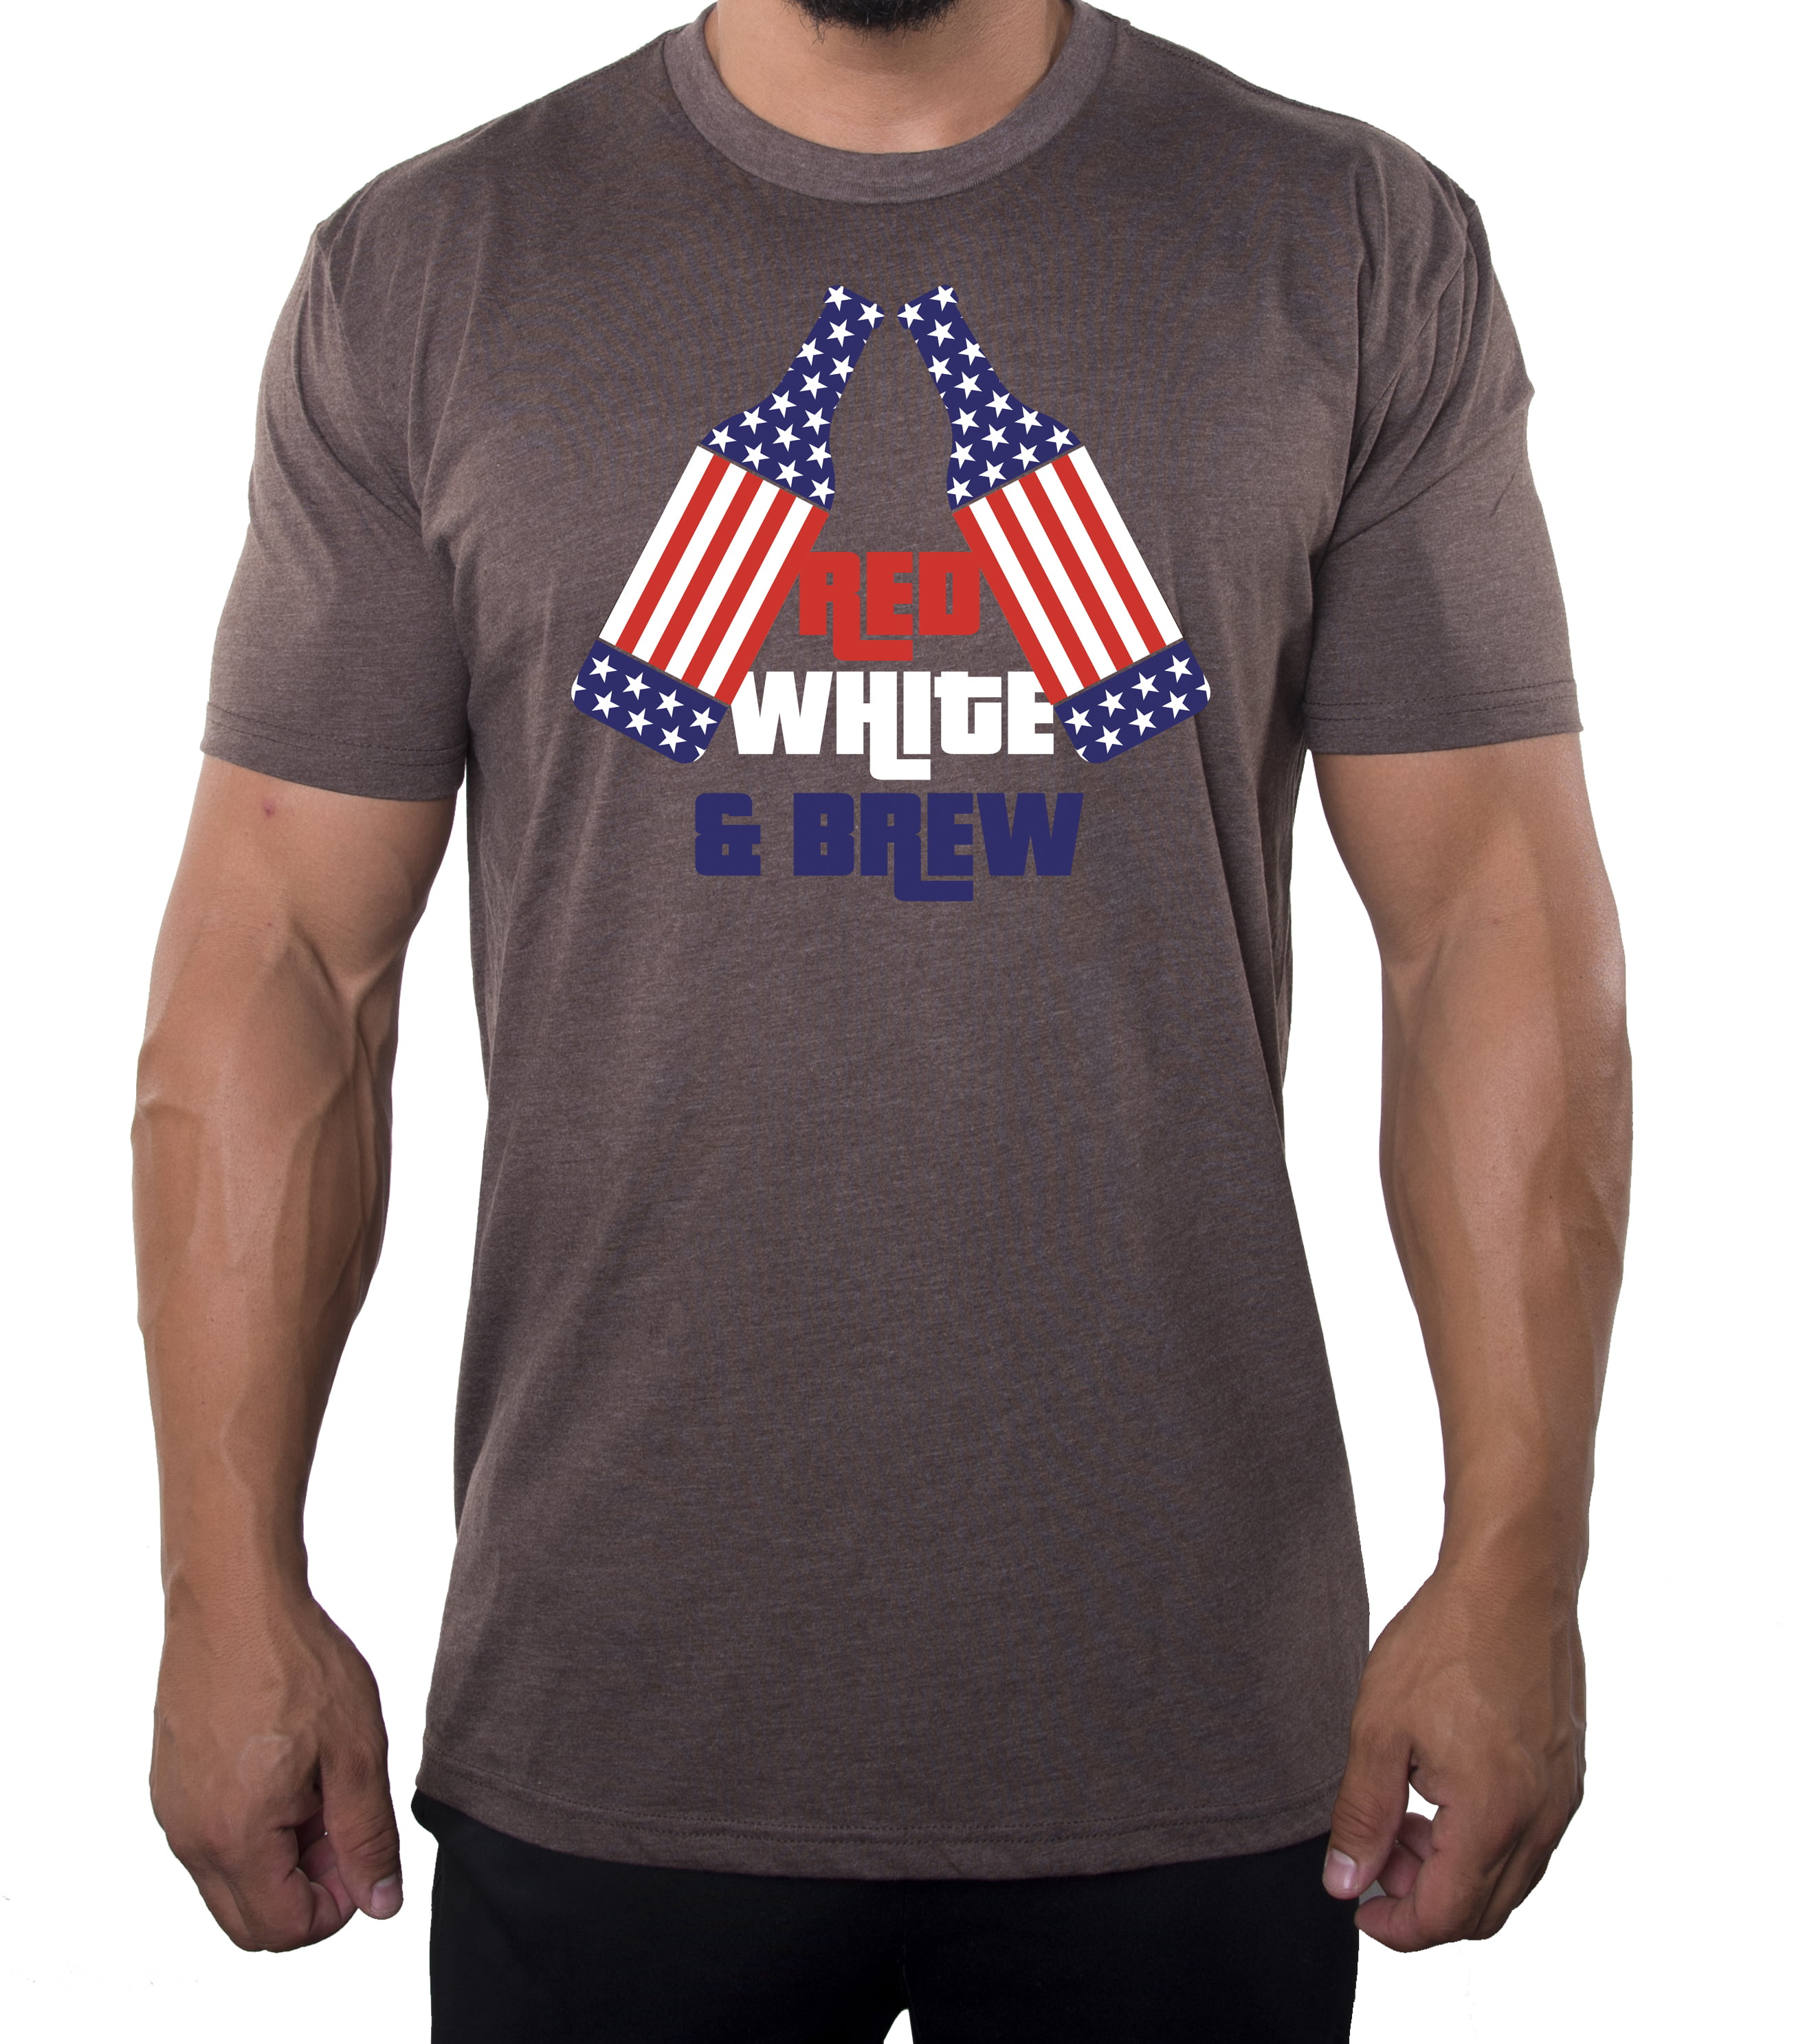 Beer Shirt Fourth Of July Shirt Red White And Blue Shirt 4th Of July Shirt Natural Light Beer Shirt Red White And Brew Shirt